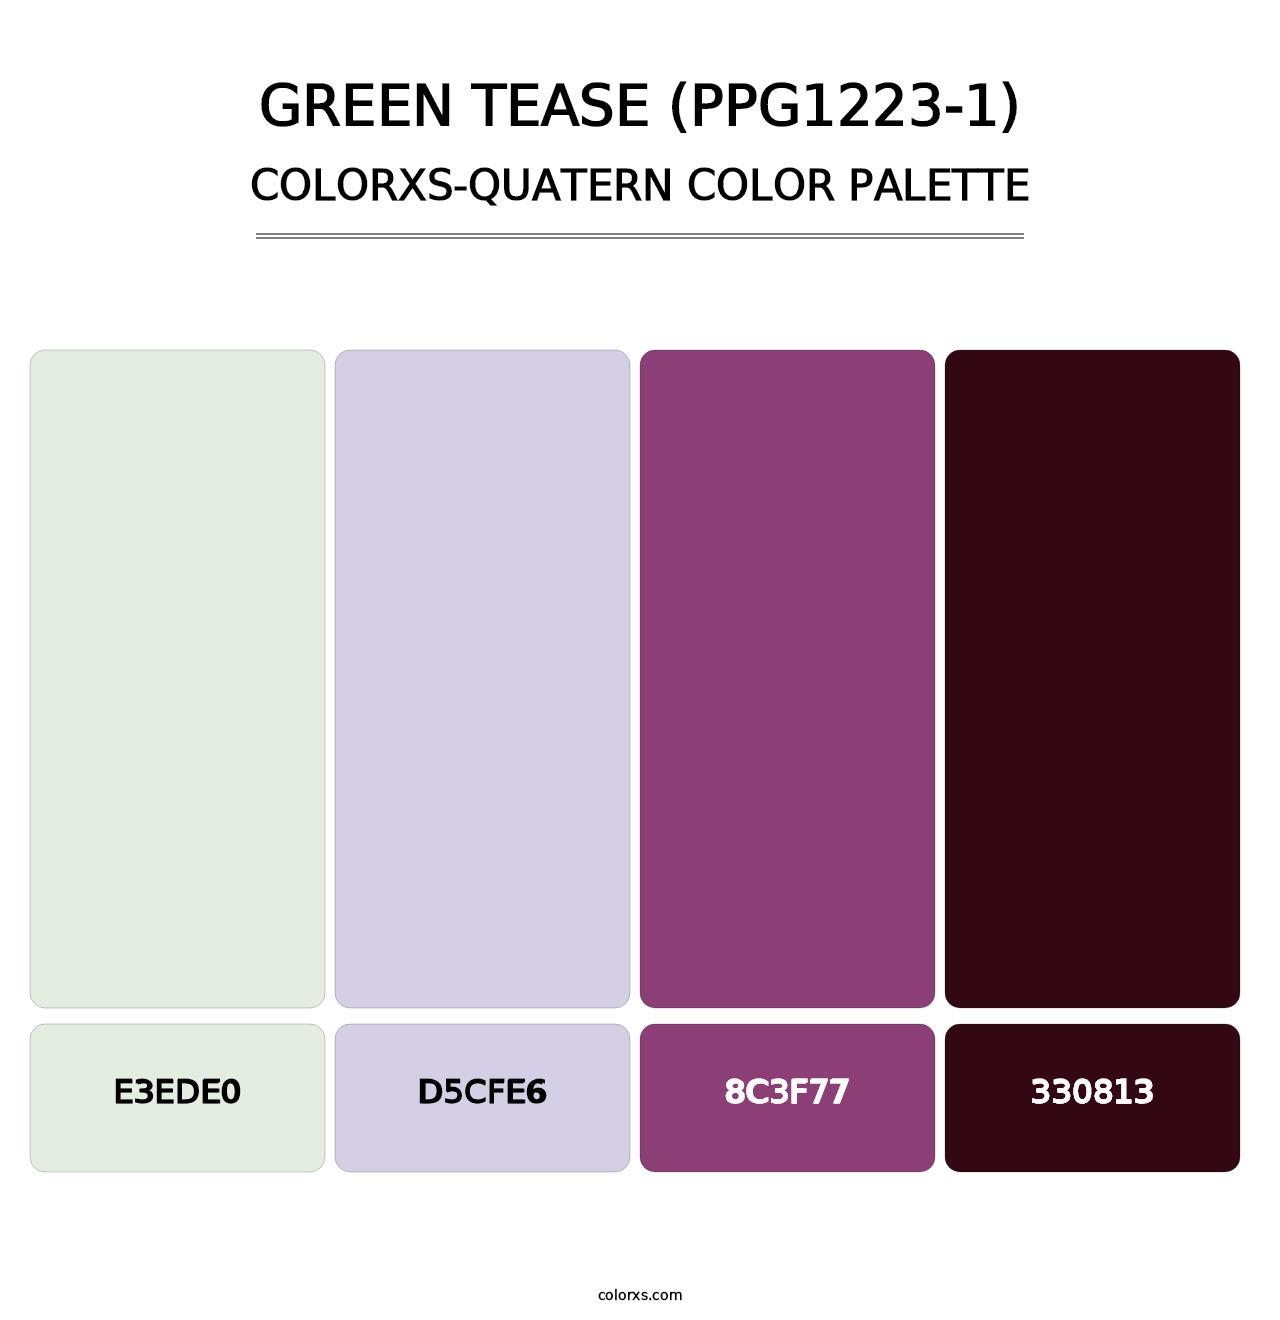 Green Tease (PPG1223-1) - Colorxs Quatern Palette